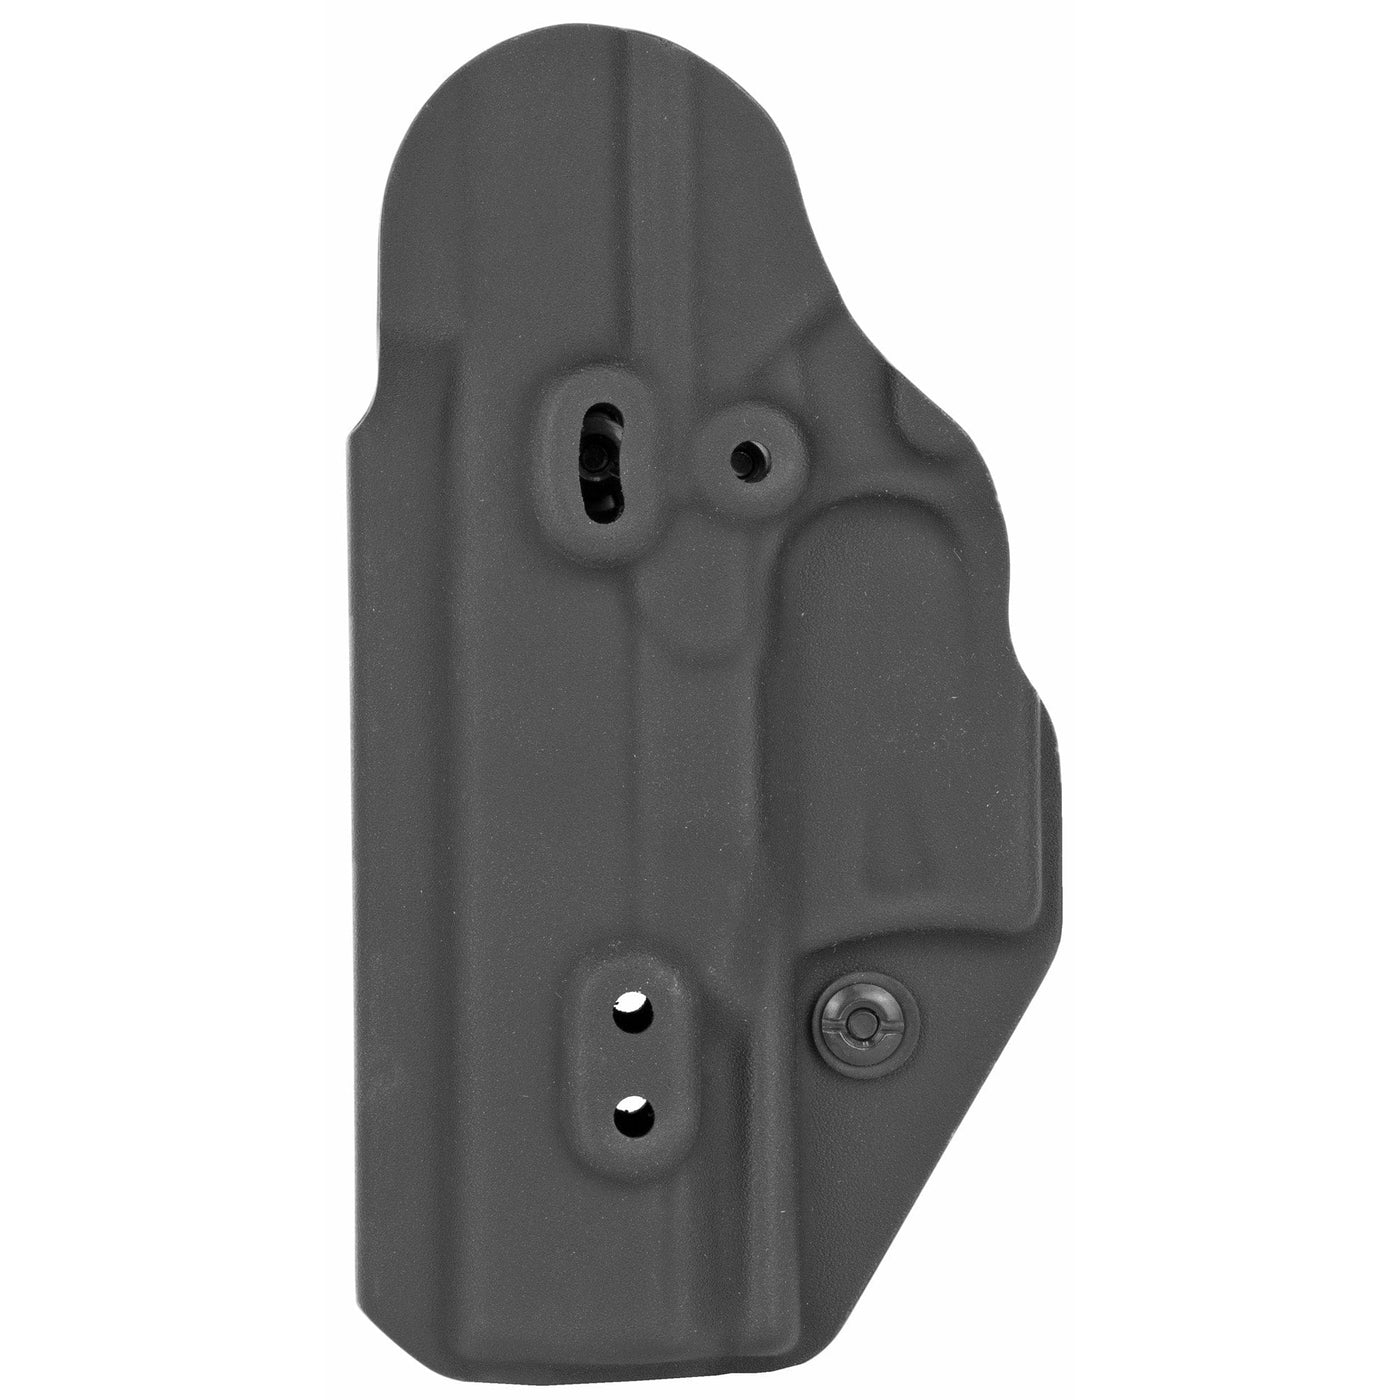 L.A.G. Tactical, Inc. Lag Lib Mk Ii Wal Ppq M2 Blk Ambi Holsters